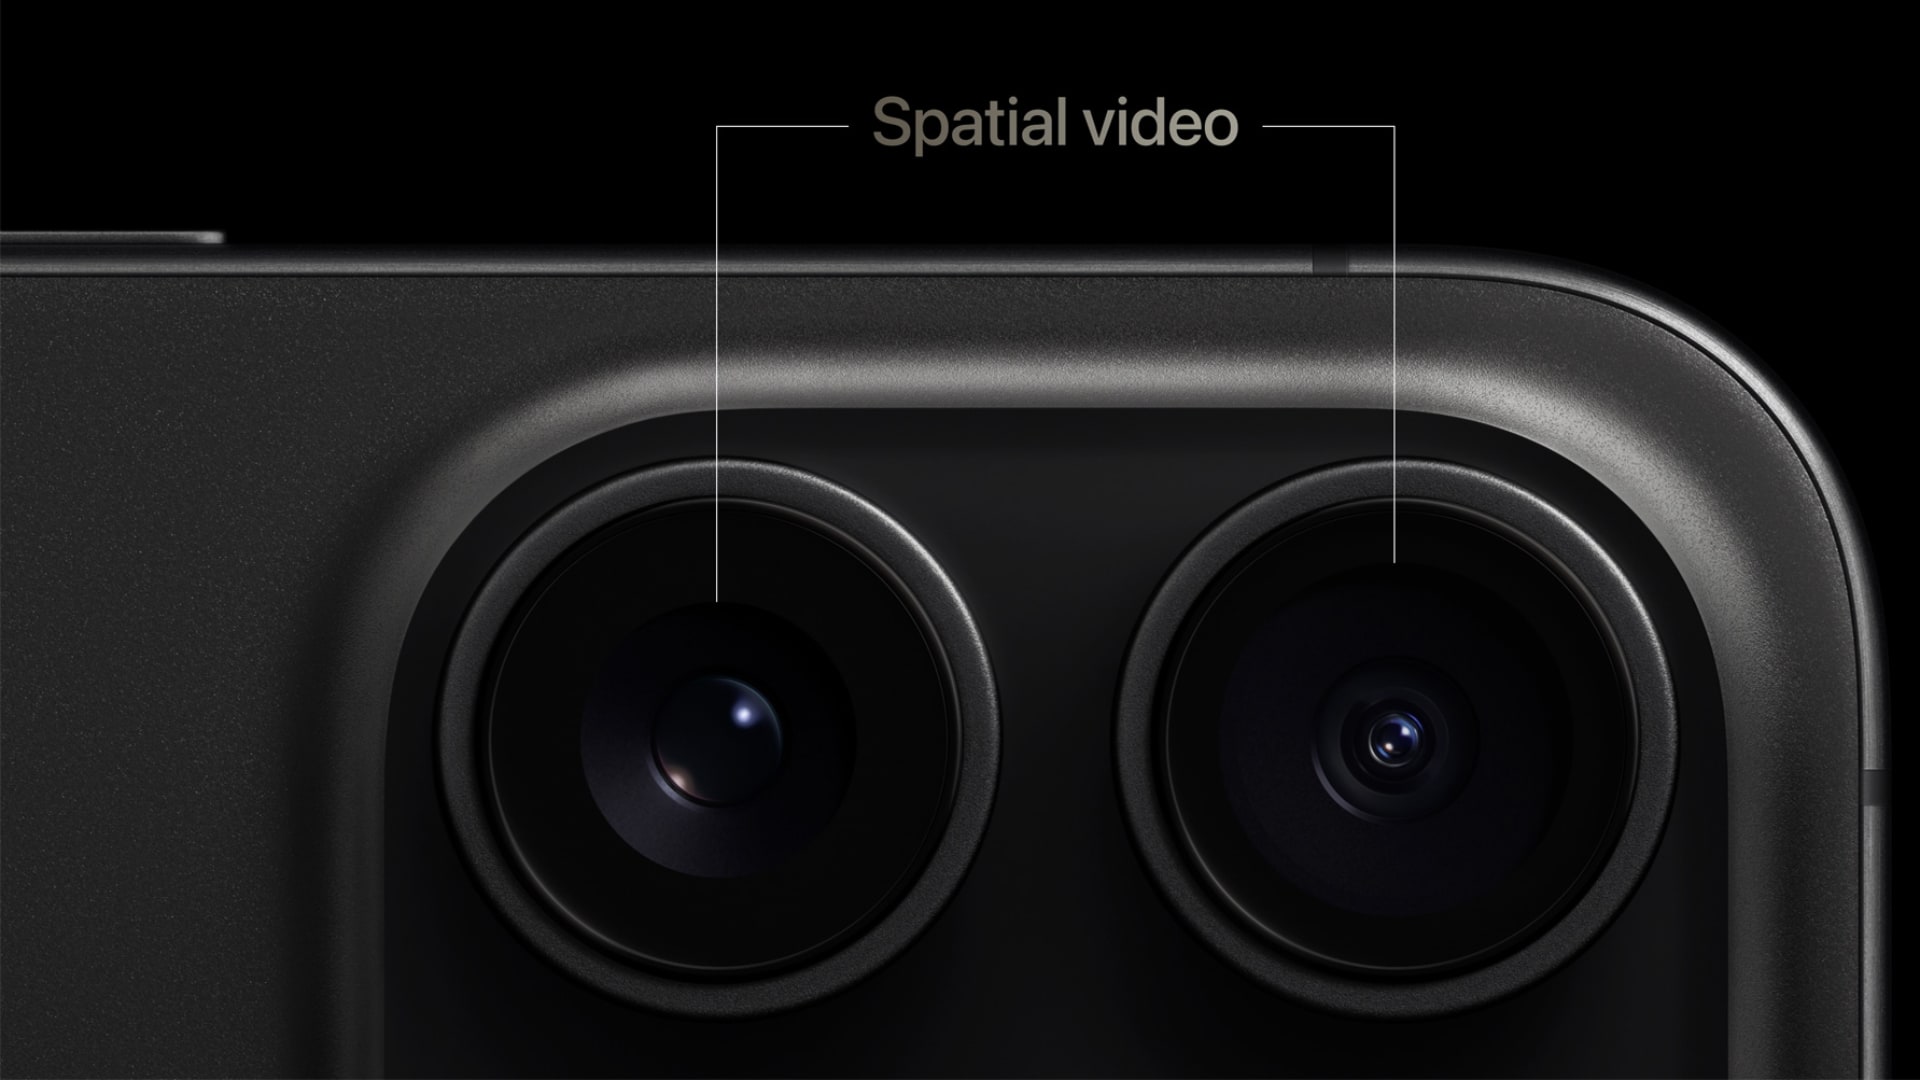 This iPhone app lets you shoot Apple’s fancy spatial videos in 4K HDR